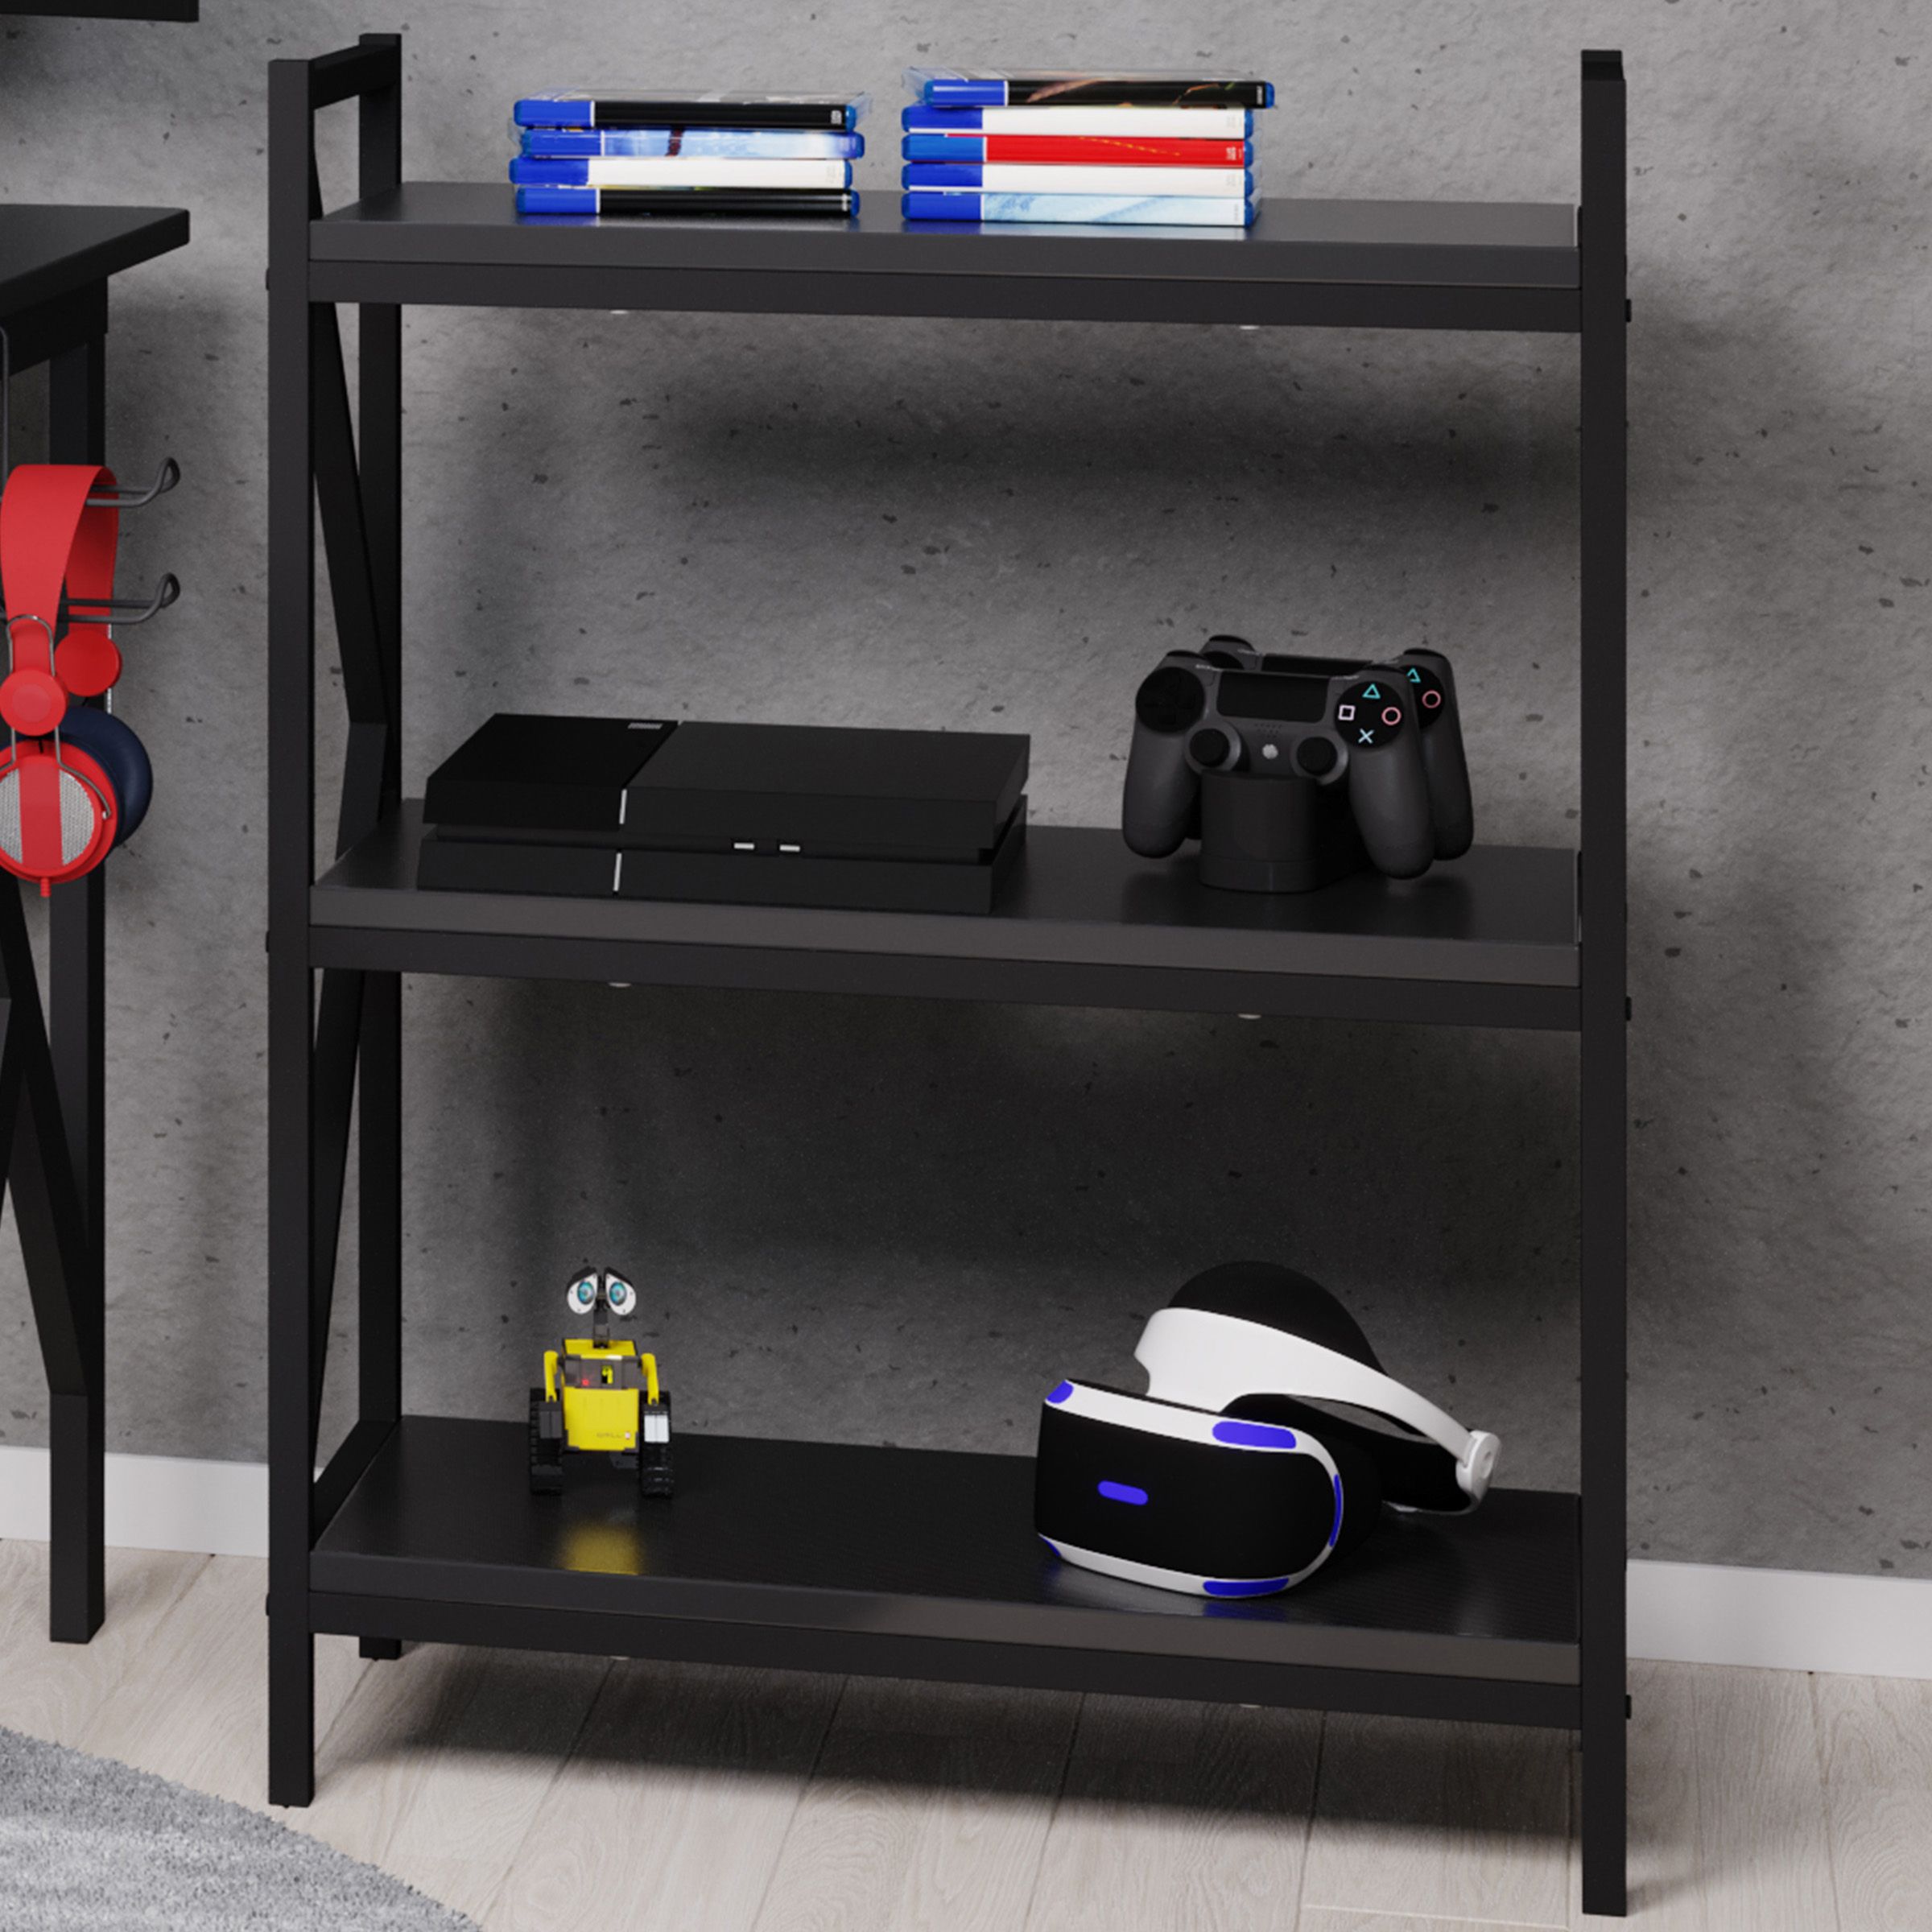 3 Shelf Bookcase – Console Table Or Storage Shelf With Carbon Fiber Texture  Finish And K Shaped Legslavish Home (black) – Walmart Throughout Textured Black Bookcases (View 12 of 15)